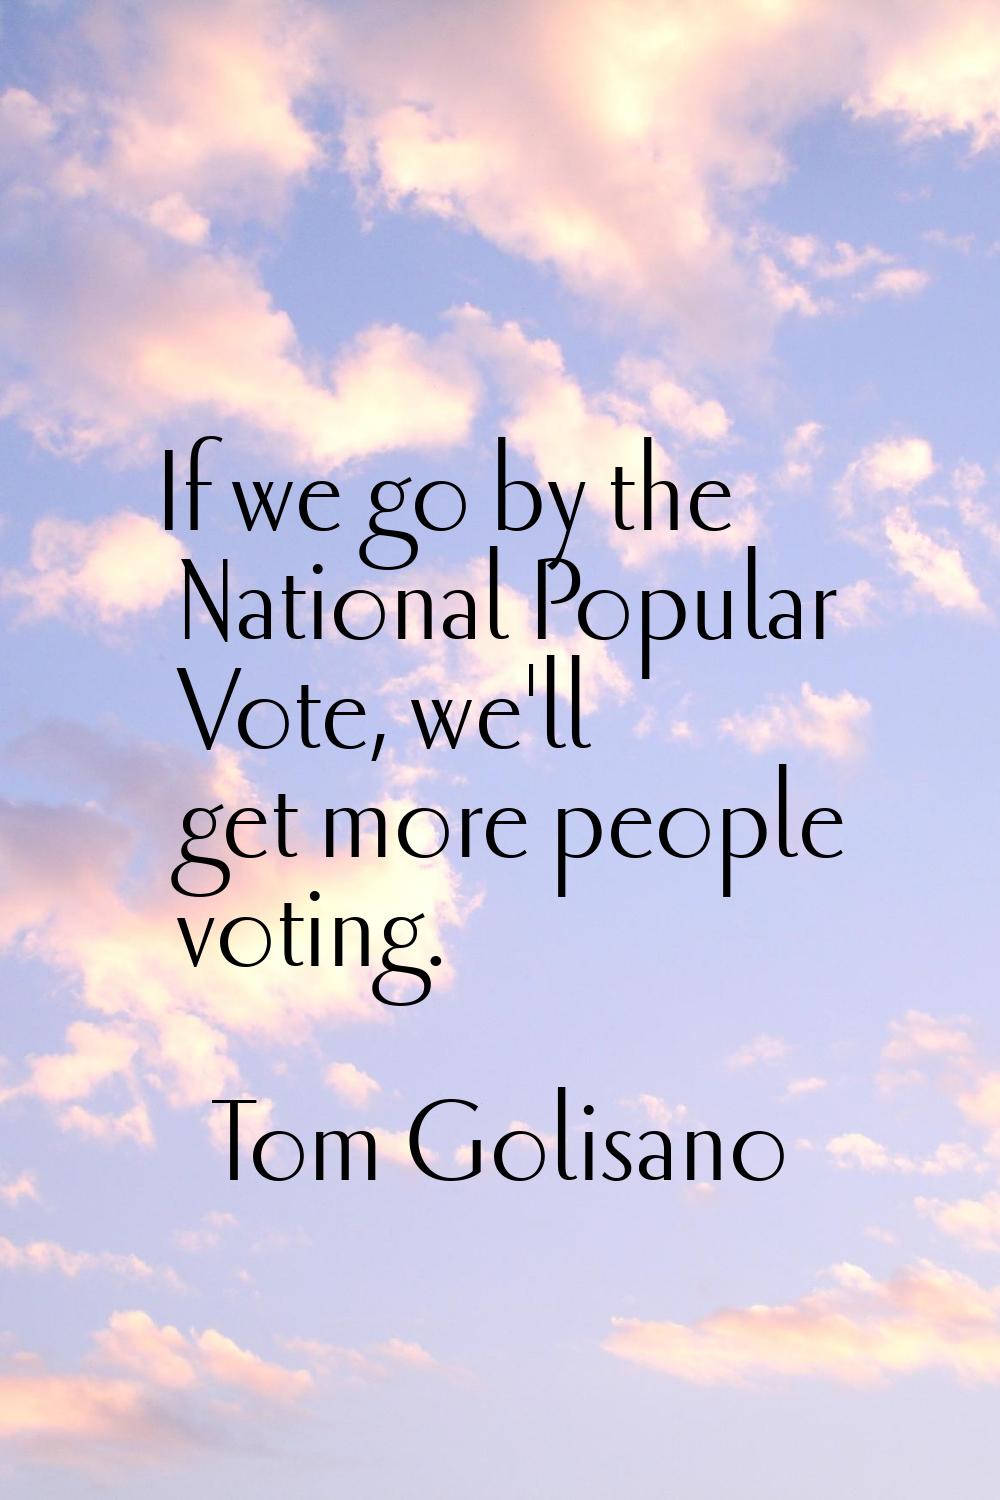 If we go by the National Popular Vote, we'll get more people voting.